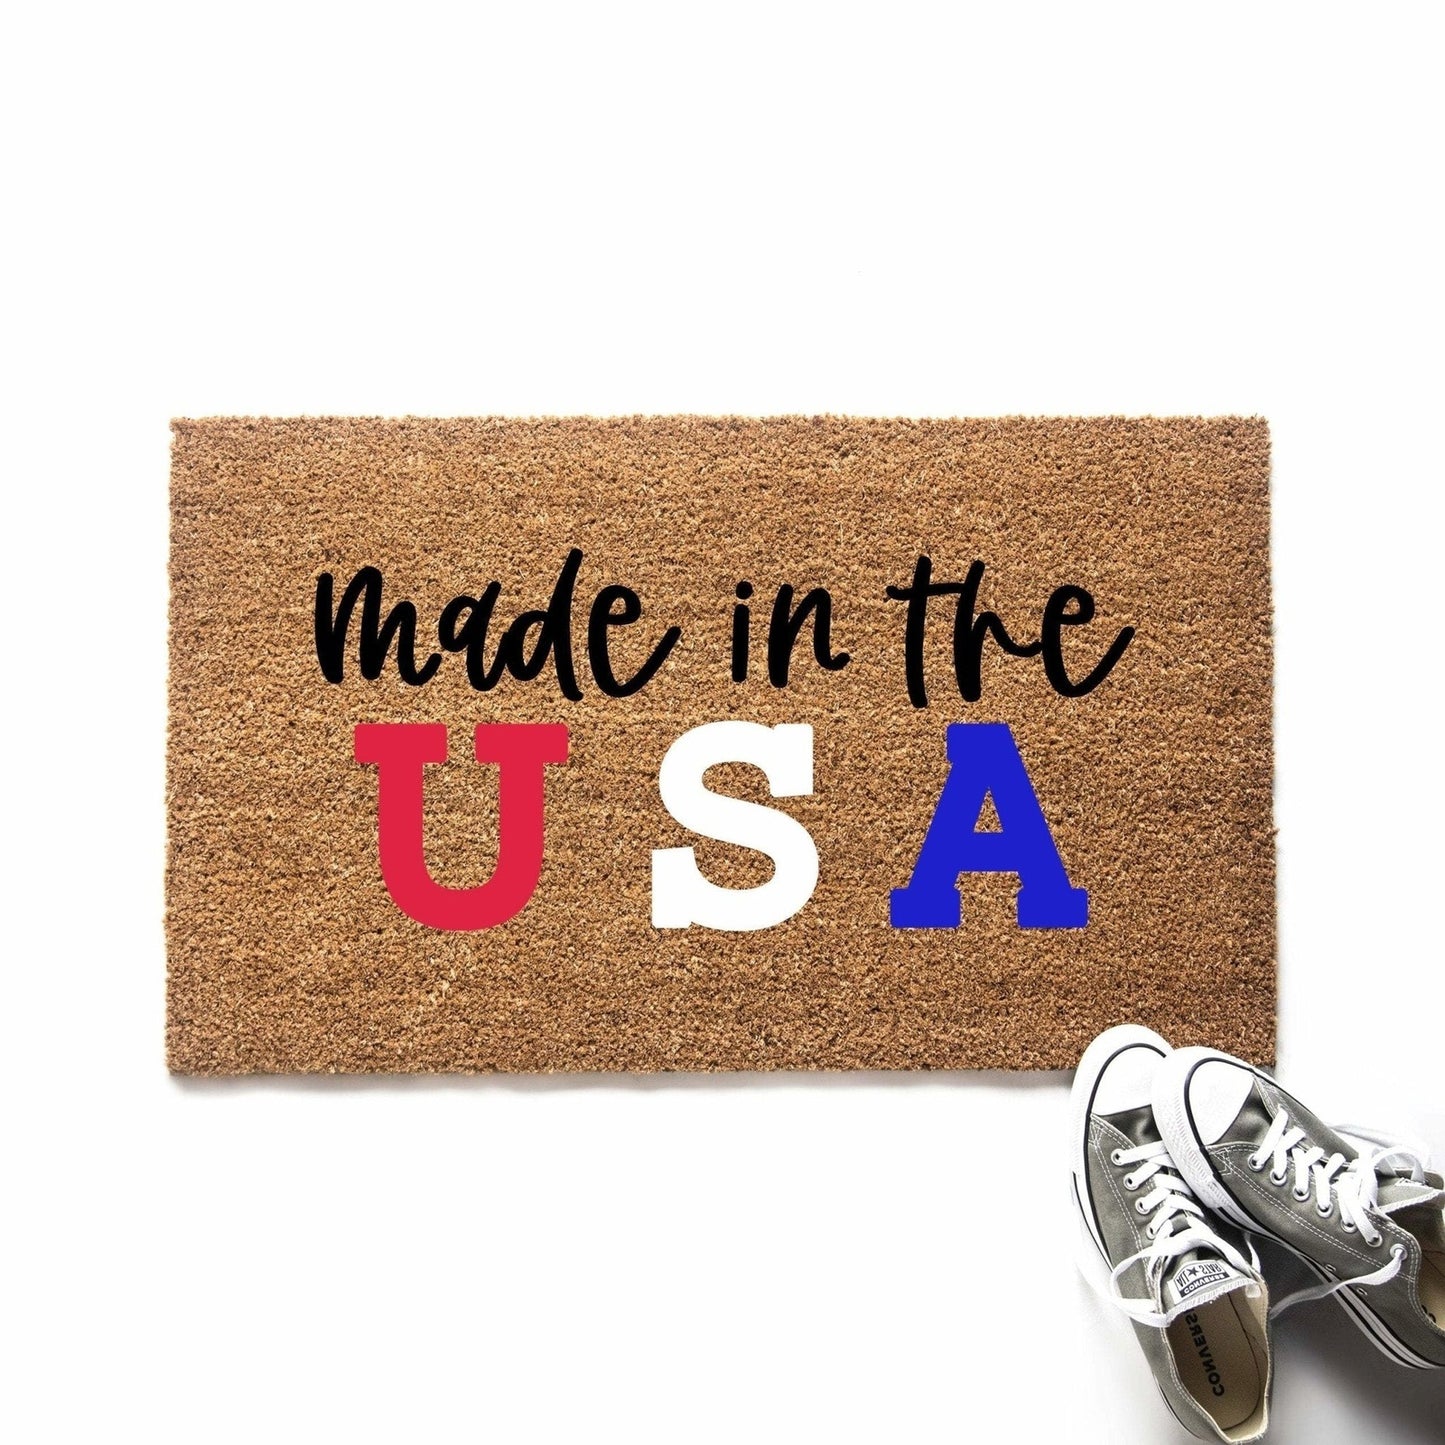 Made in the USA Doormat